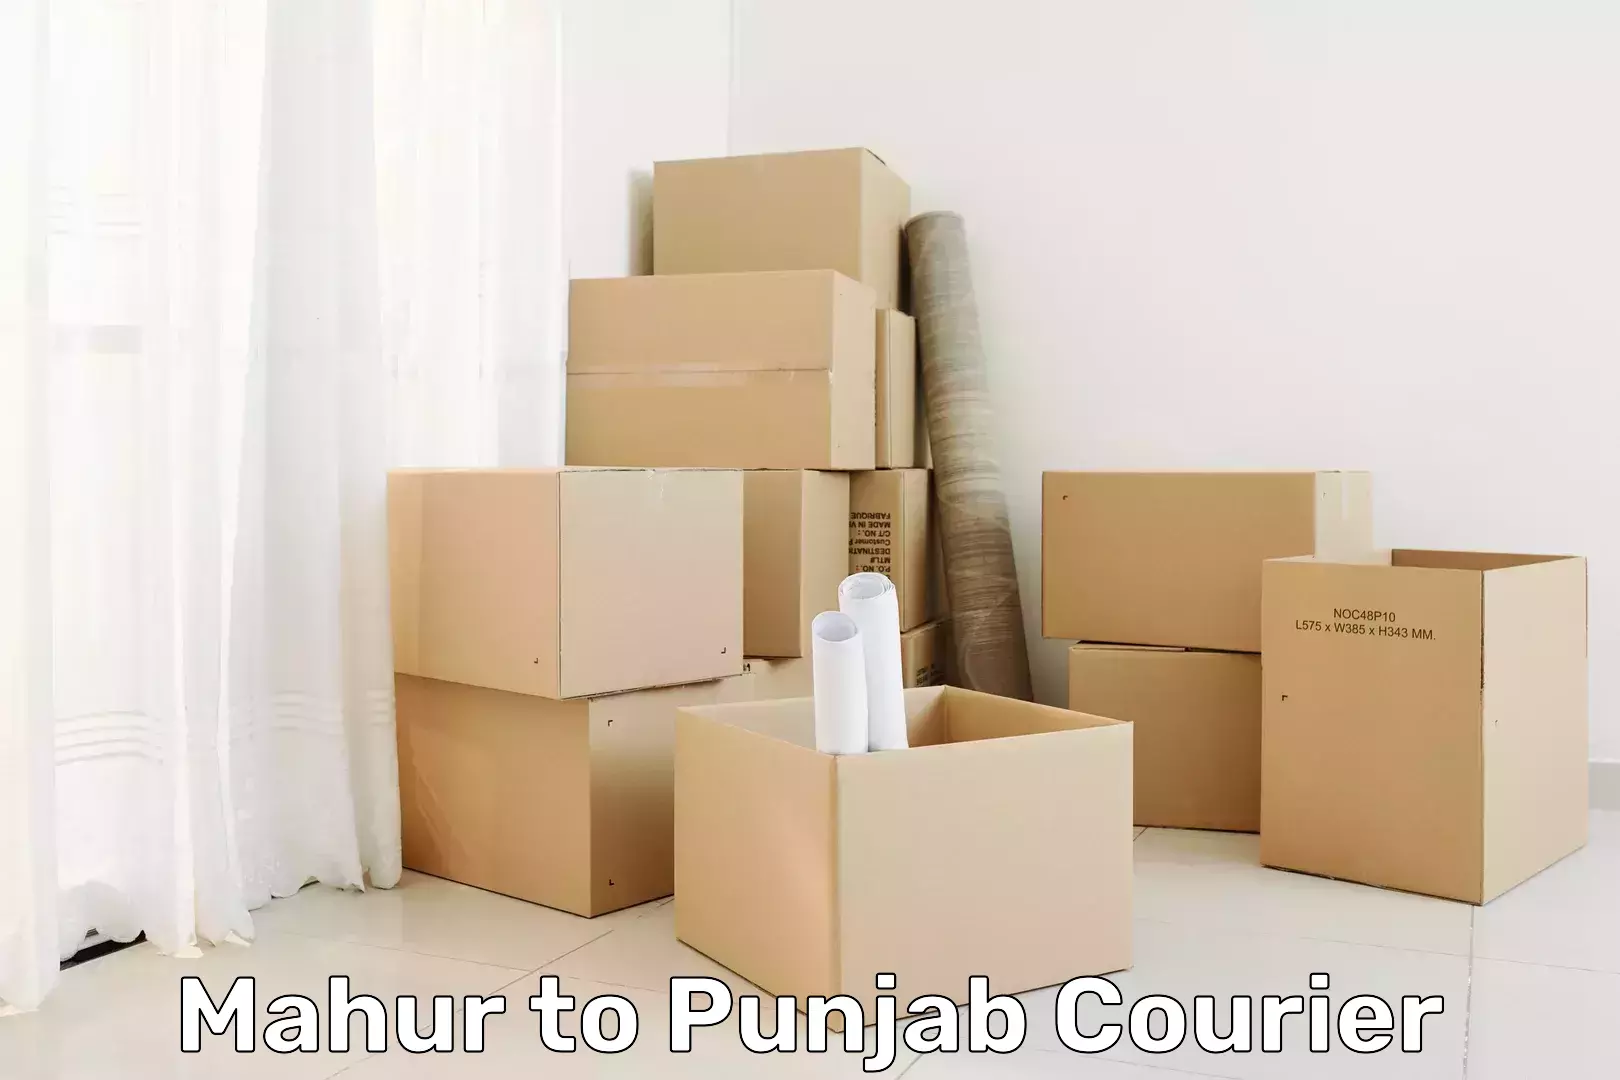 Courier service comparison in Mahur to Punjab